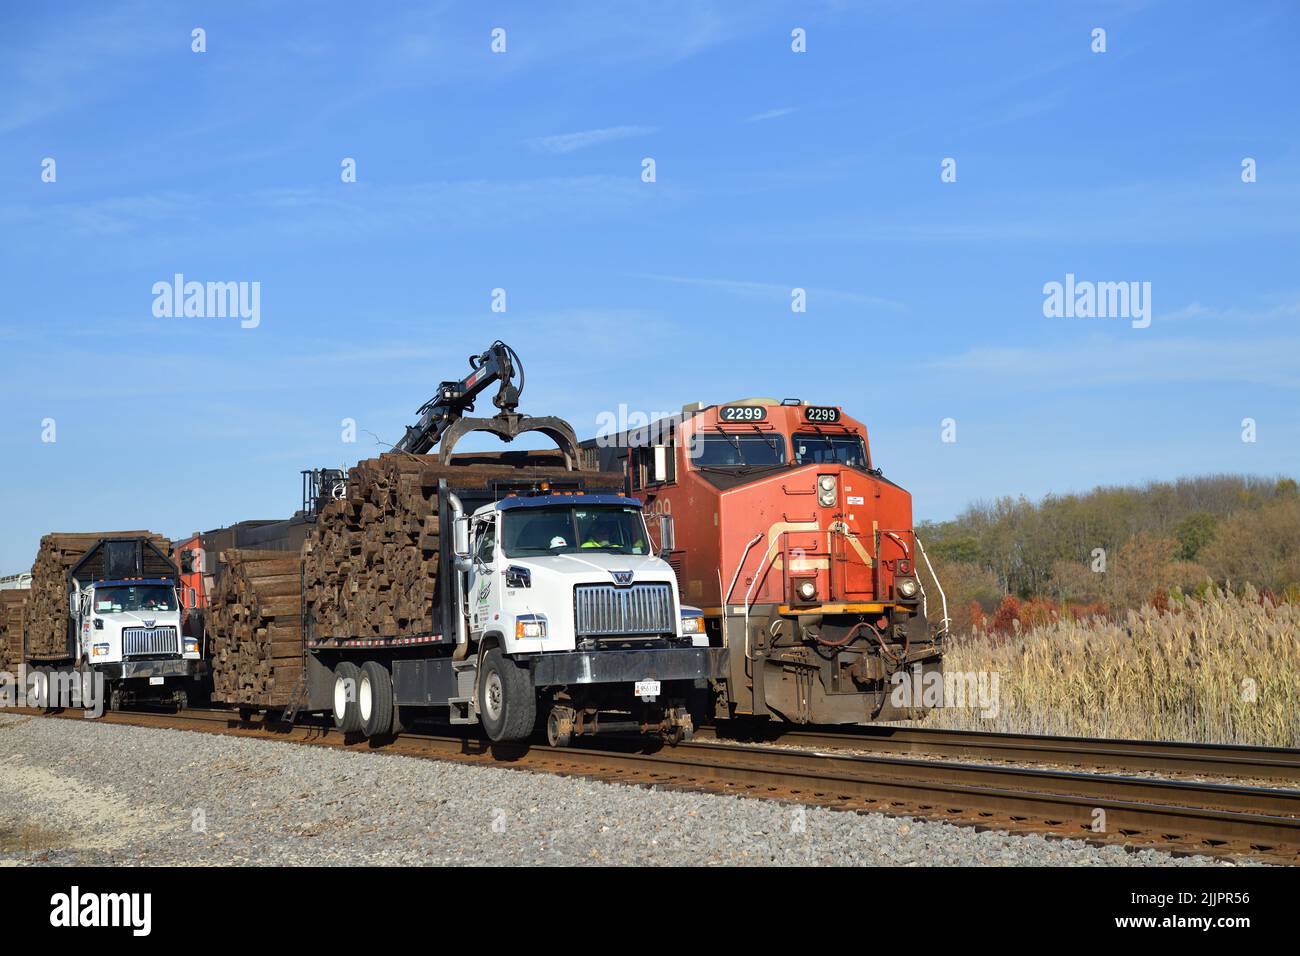 Hoffman Estates, Illinois, USA. Convertible road to rail trucks carry and provide pulling power as part of a tie replacement effort along the tracks. Stock Photo